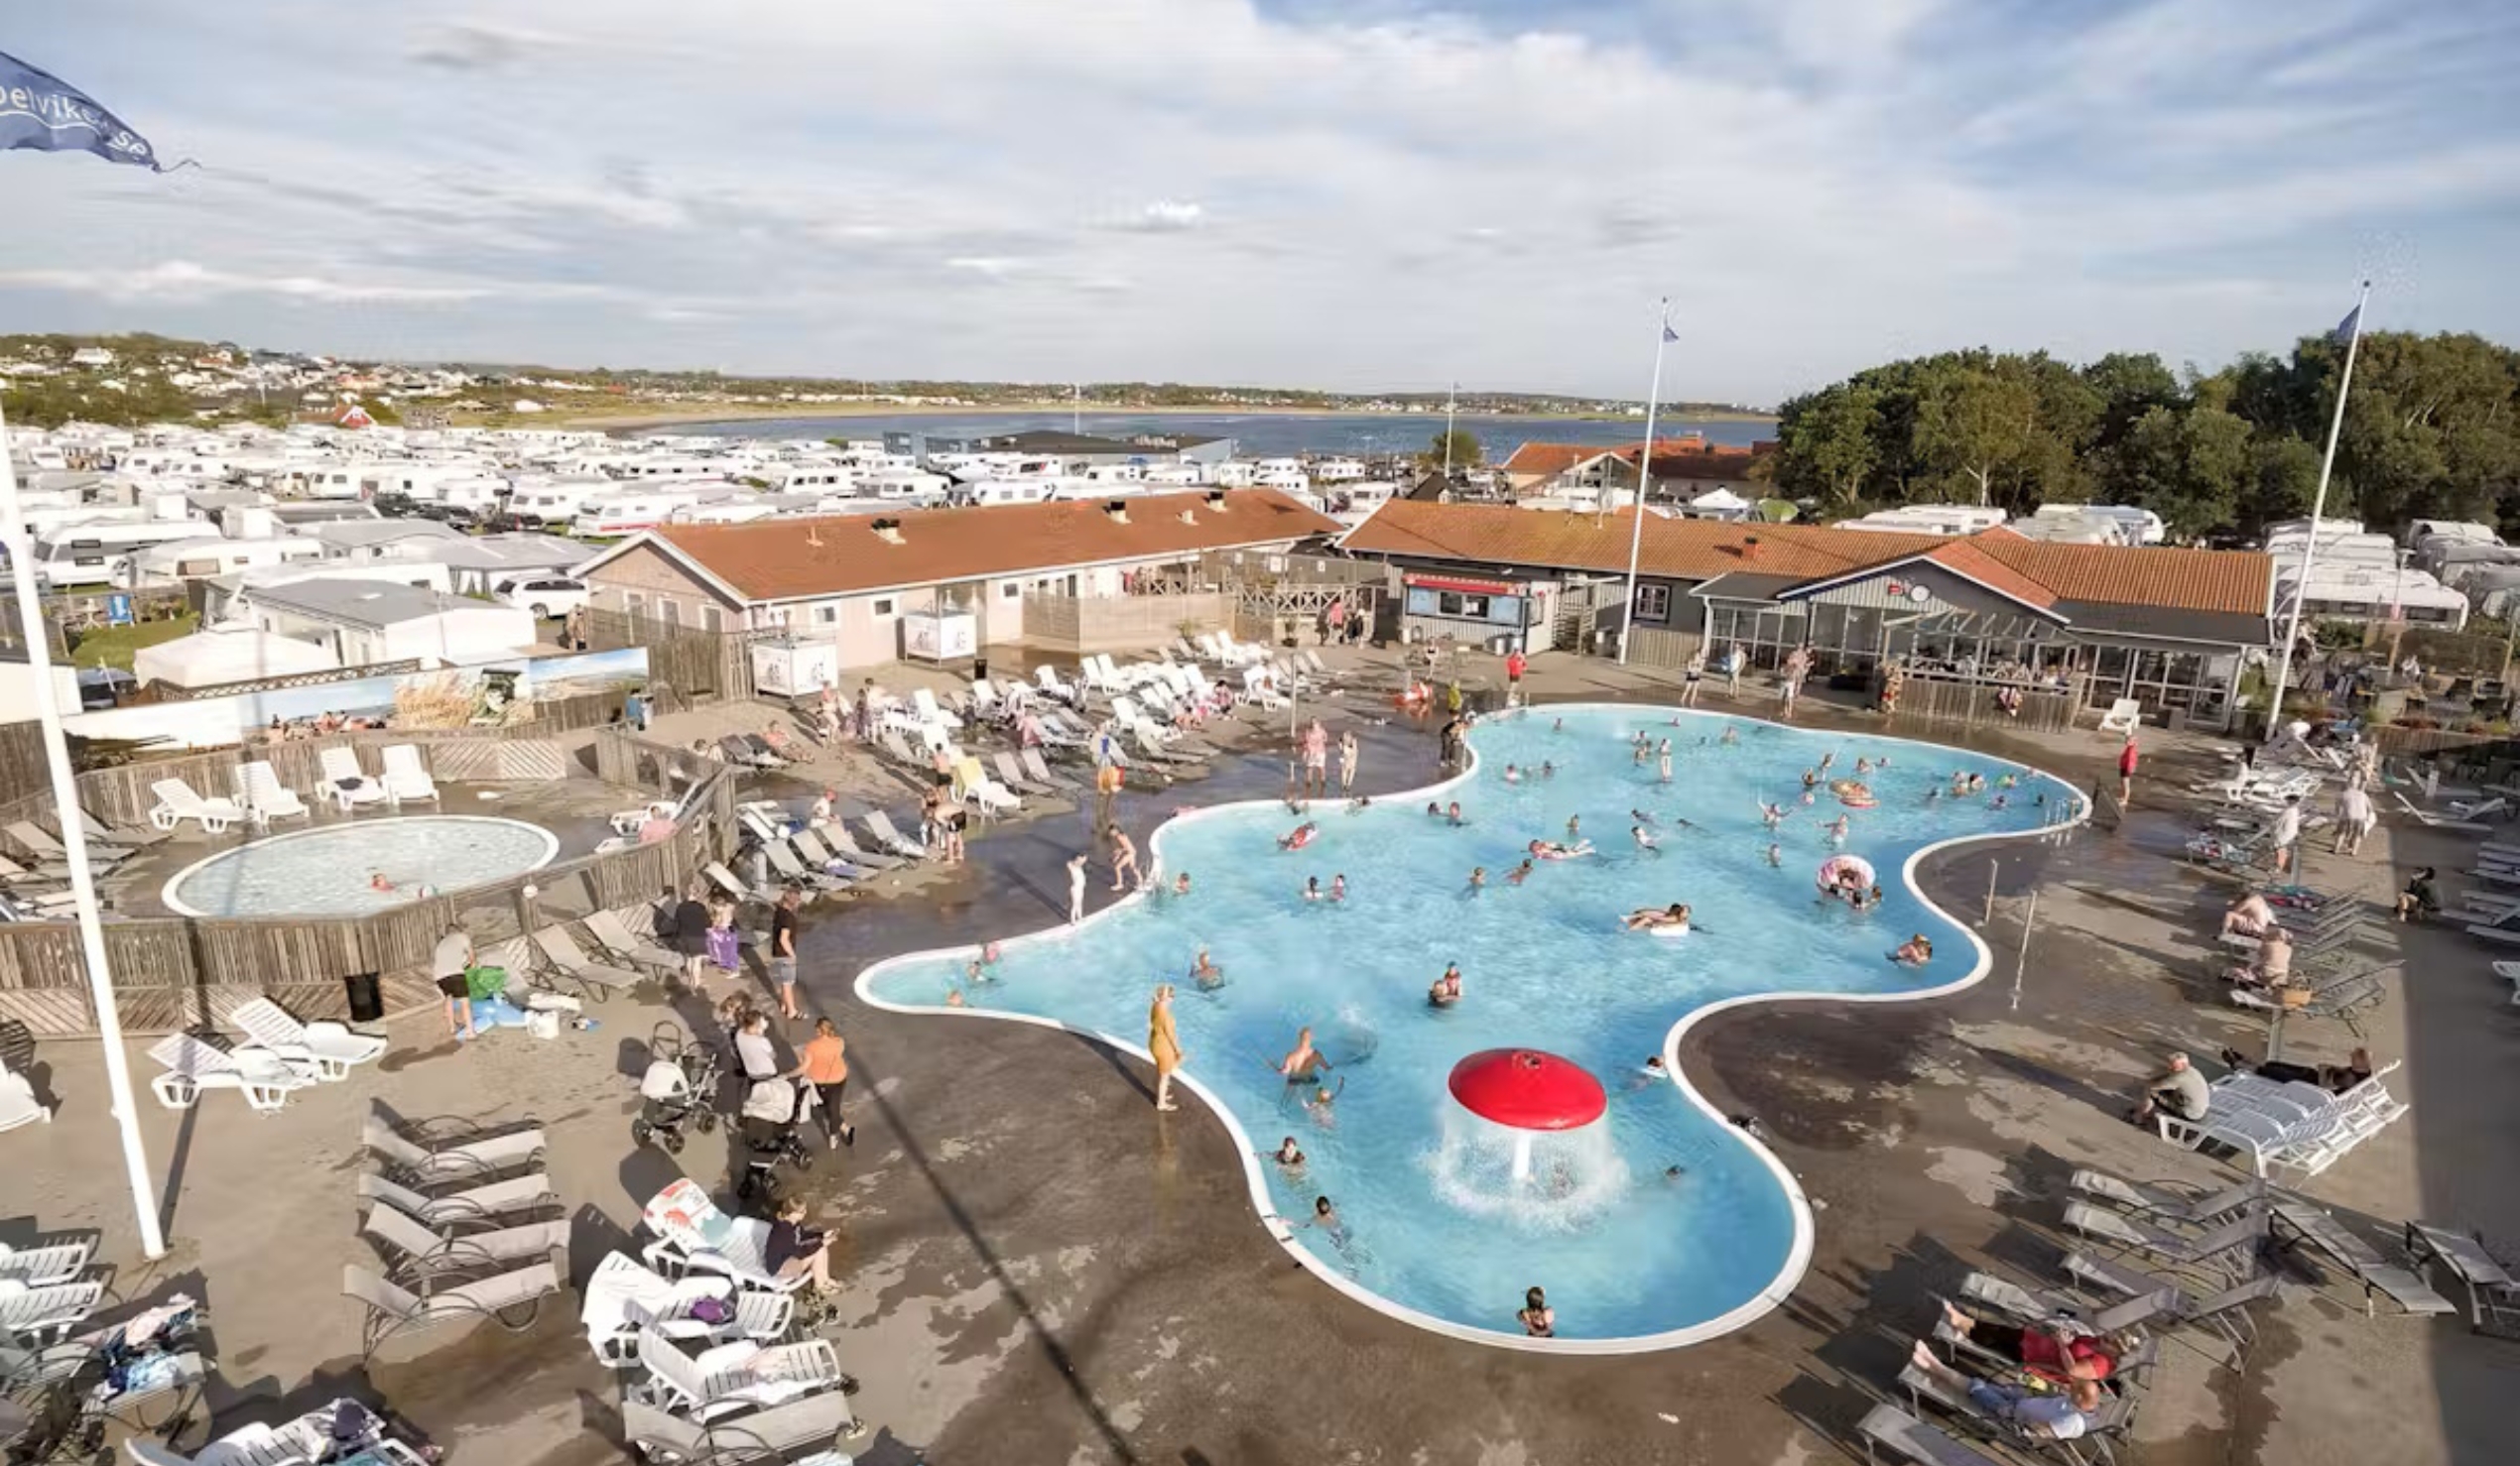 At Destination Apelviken, there is a large outdoor pool. 